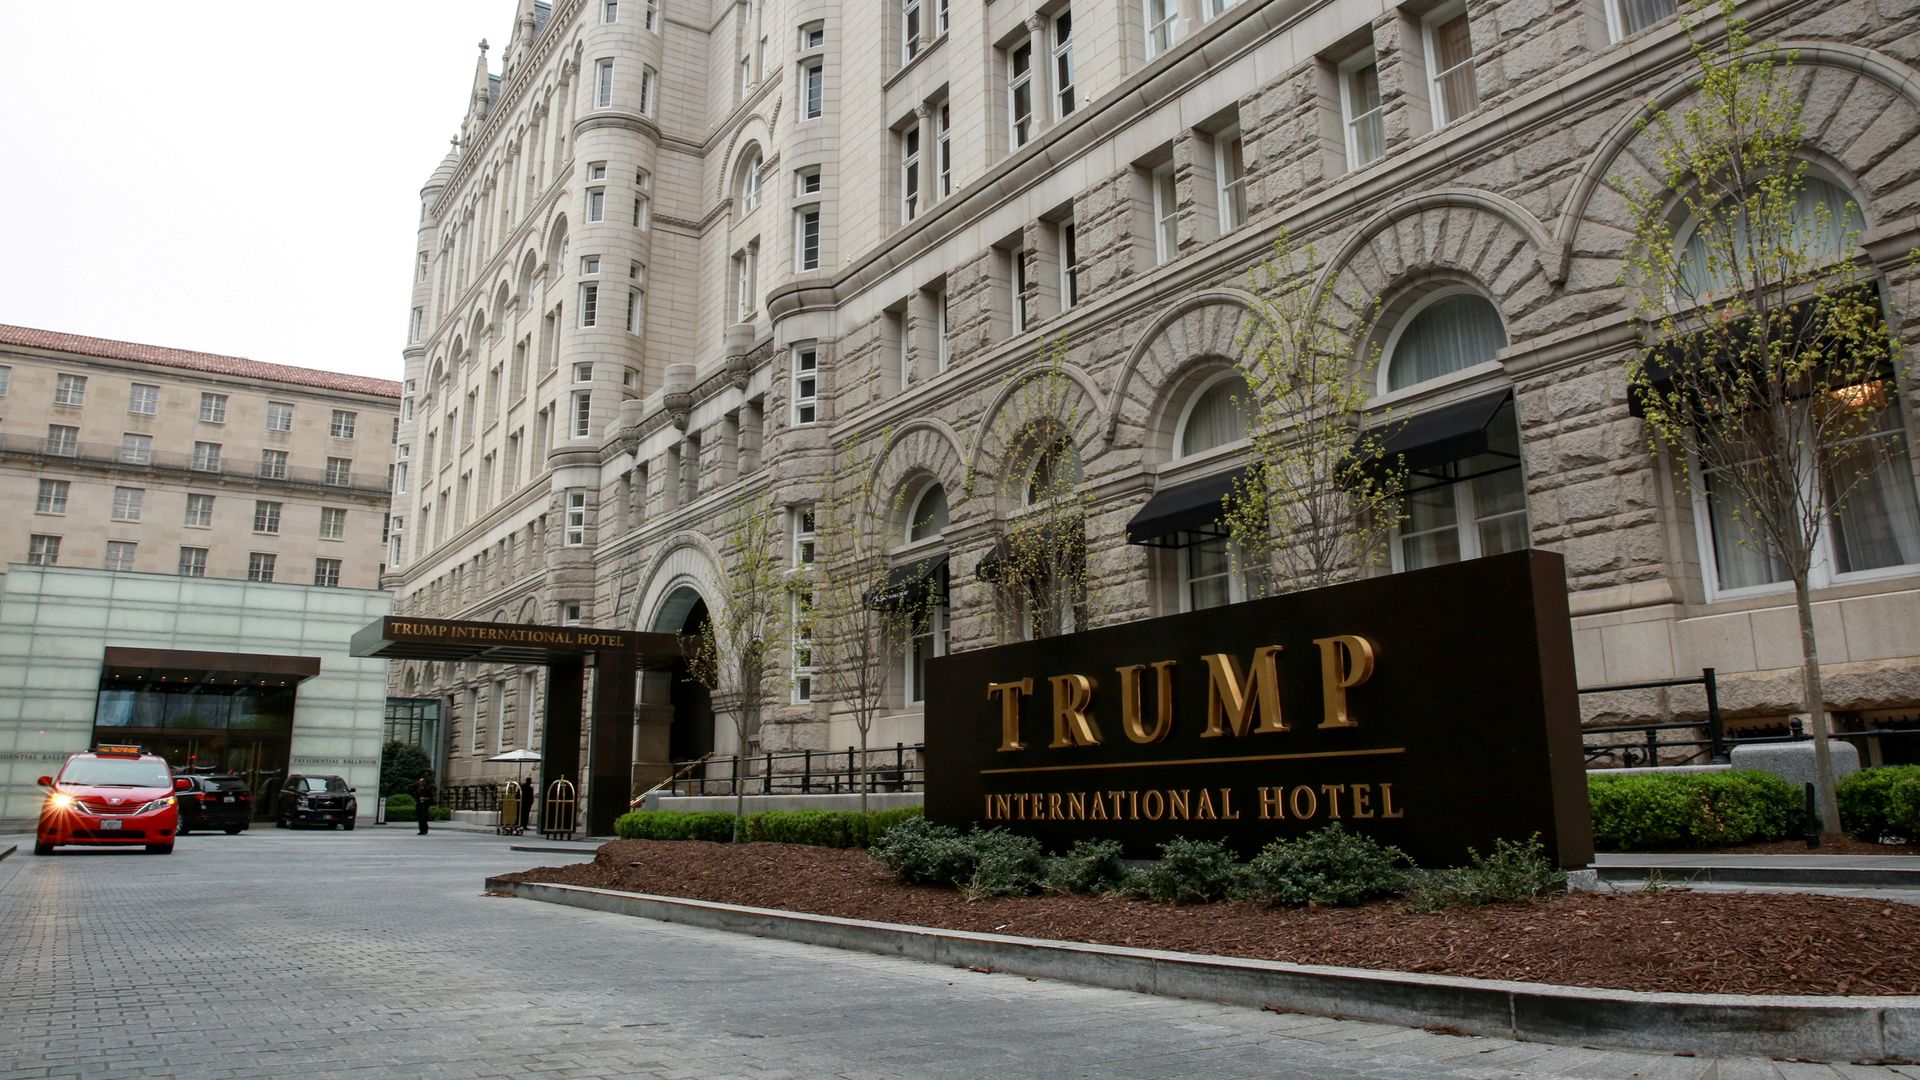 In this image the Trump International Hotel sign is seen in front of a hotel building. 